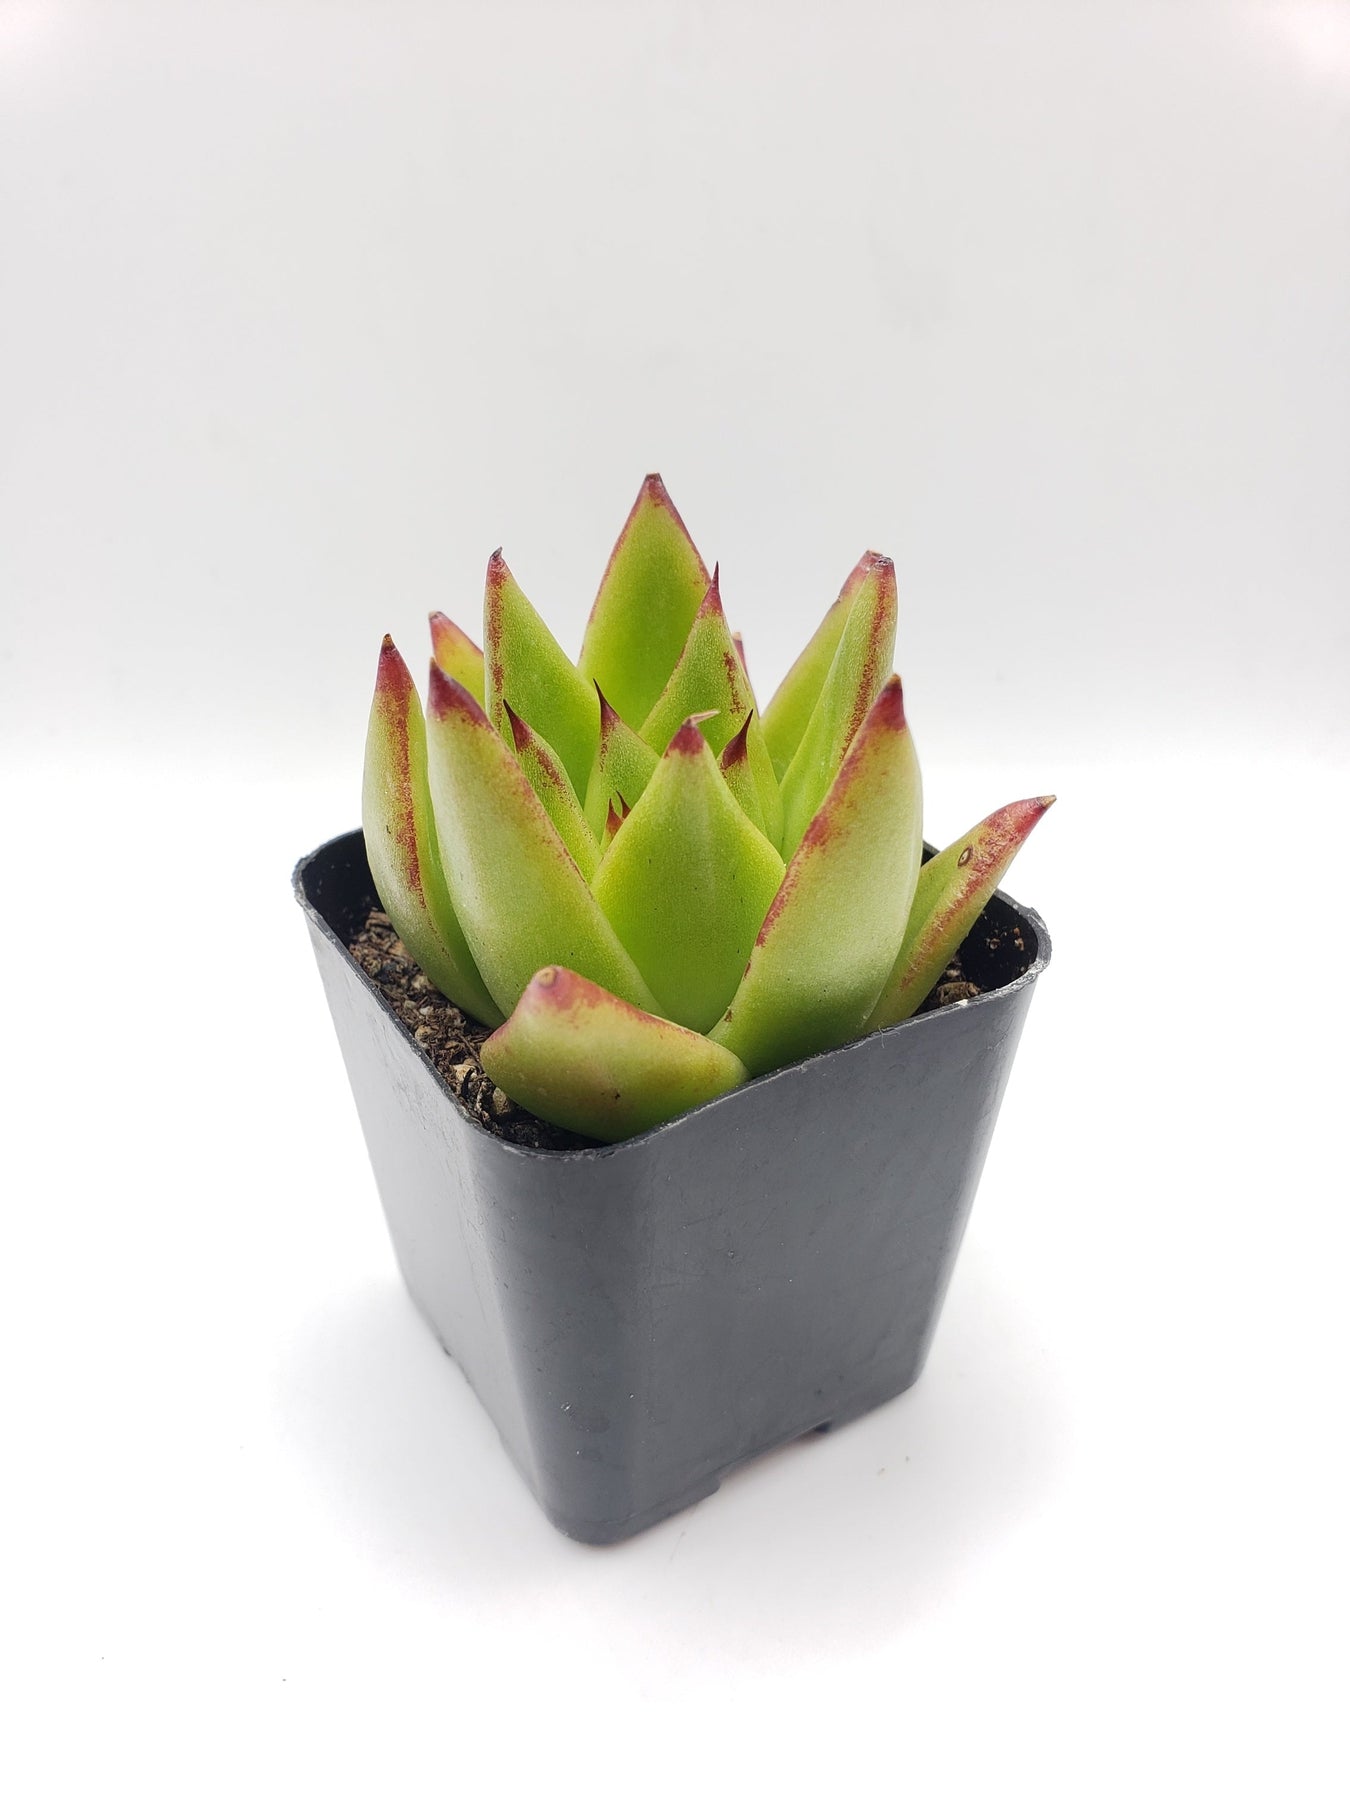 #52 Echeveria agavoides lipstick-Succulent - Small - Exact 2in Type-The Succulent Source